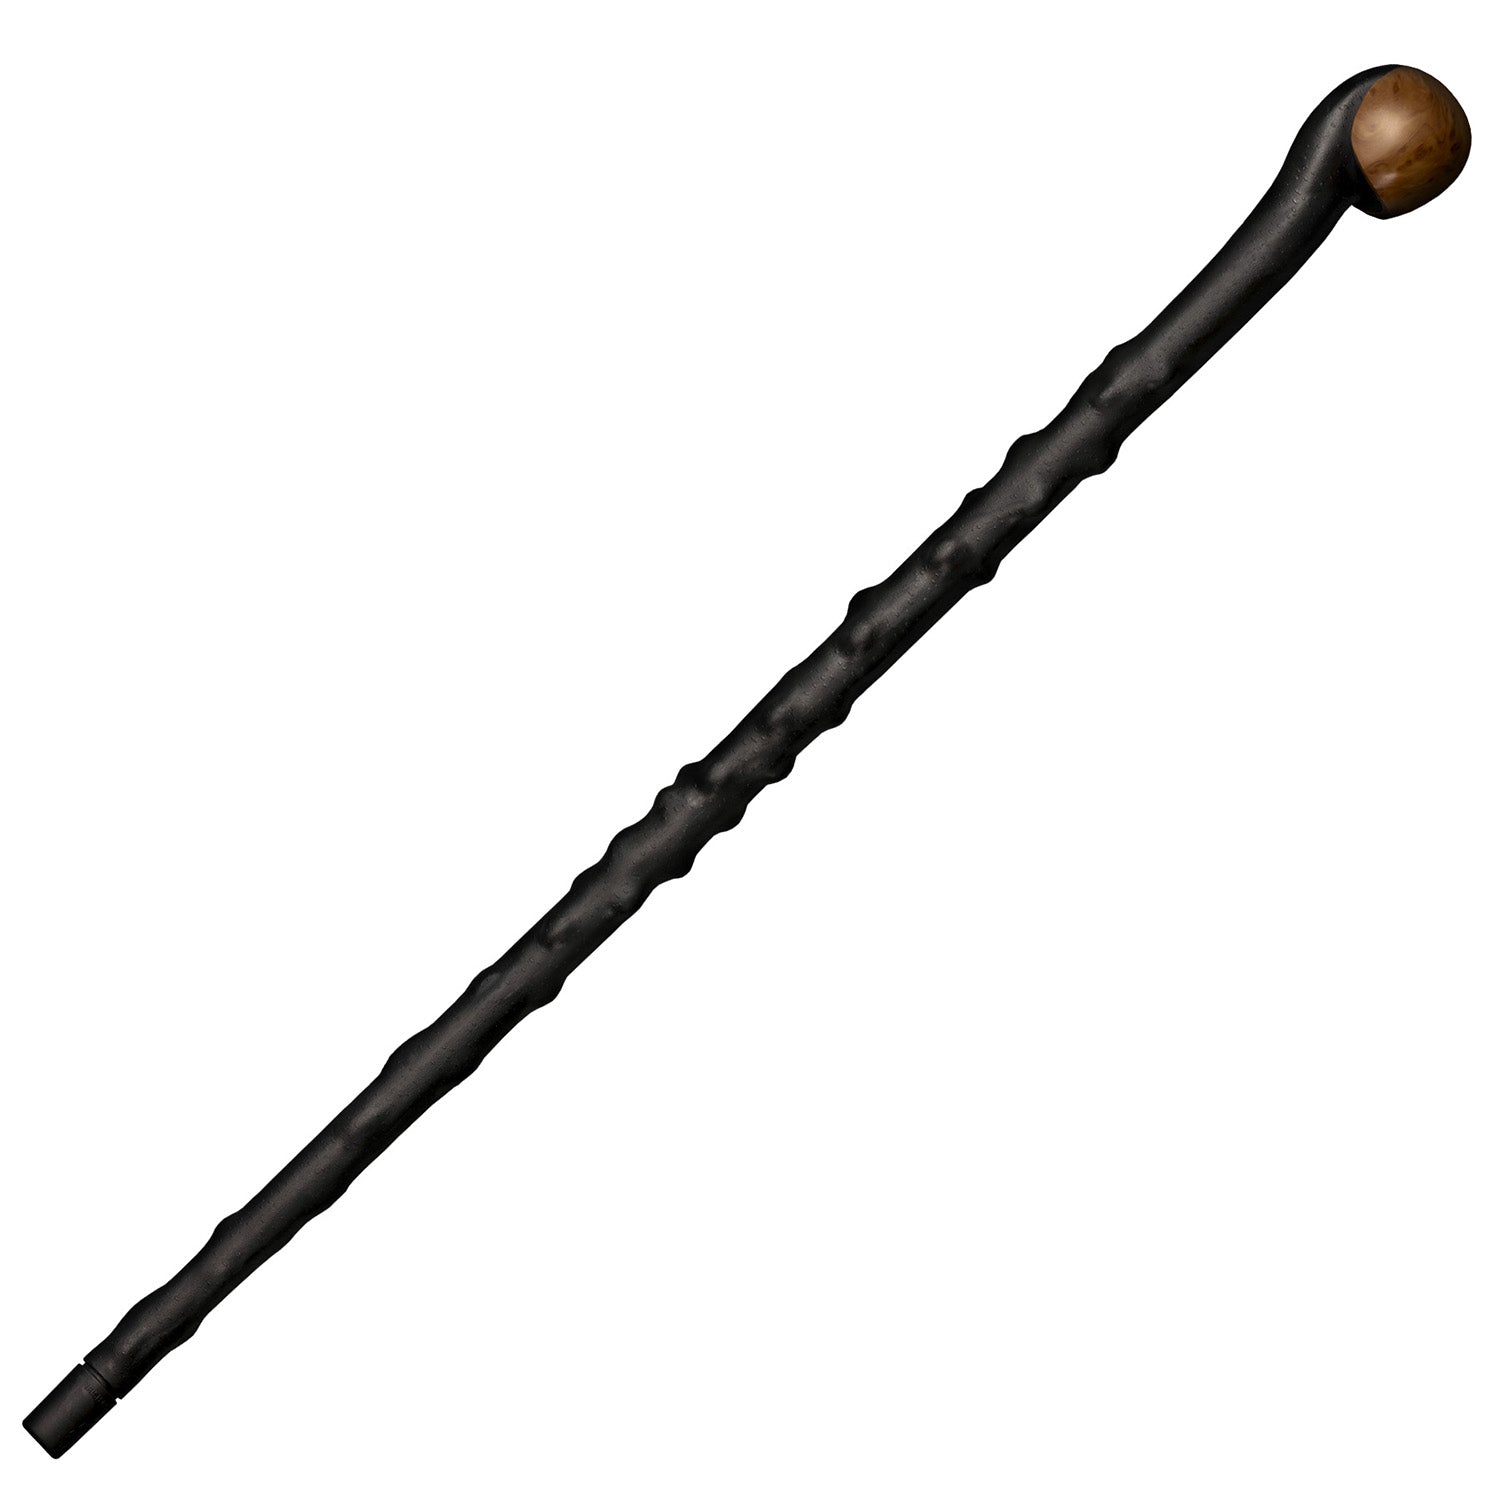 Cold Steel Irish Blackthorn Walking Stick 38.50 in Overall